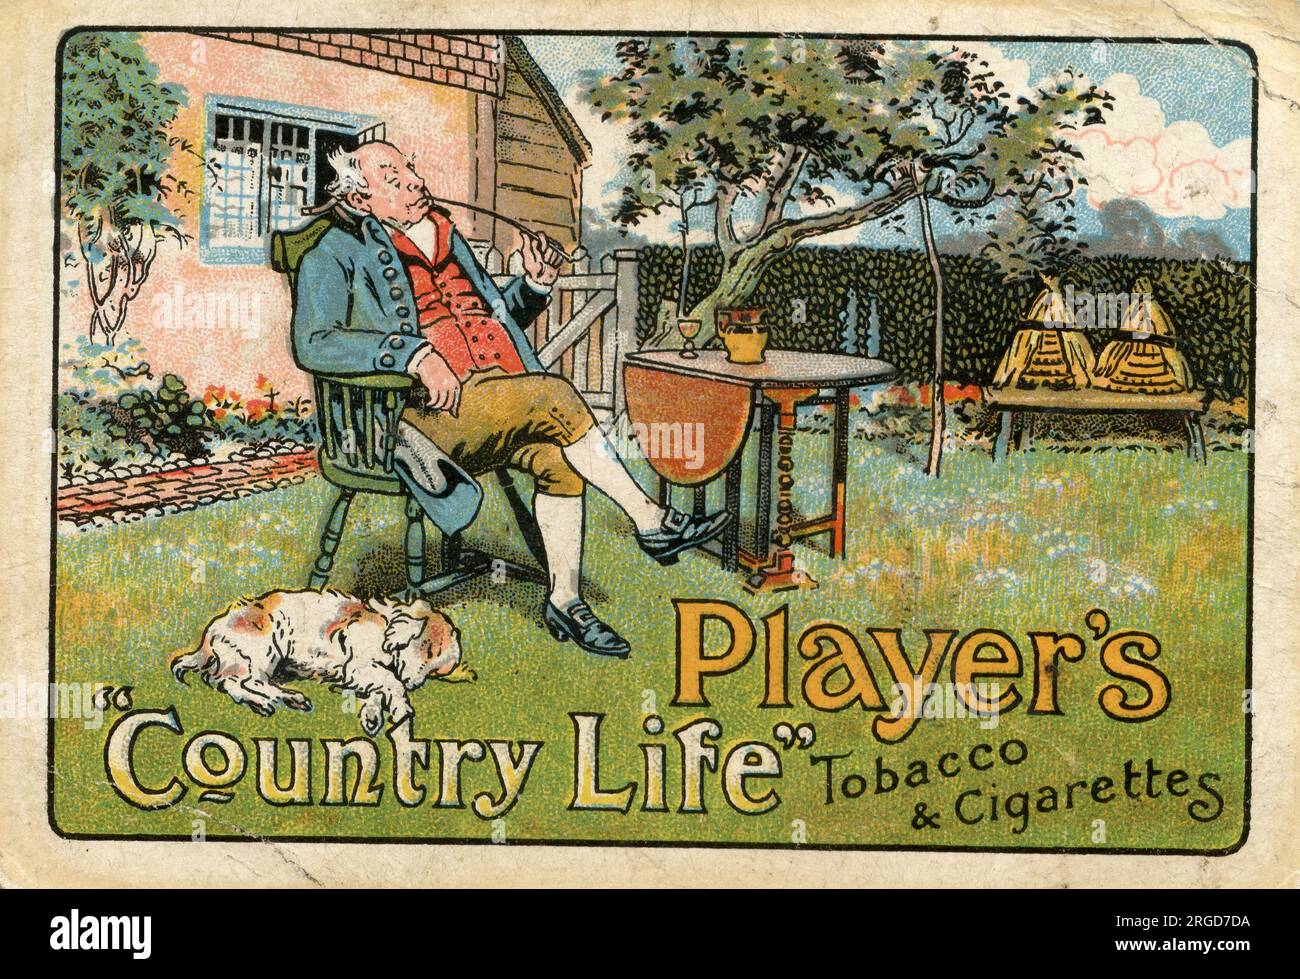 Werbespot, Player's Country Life Tobacco and Cigarettes Stockfoto